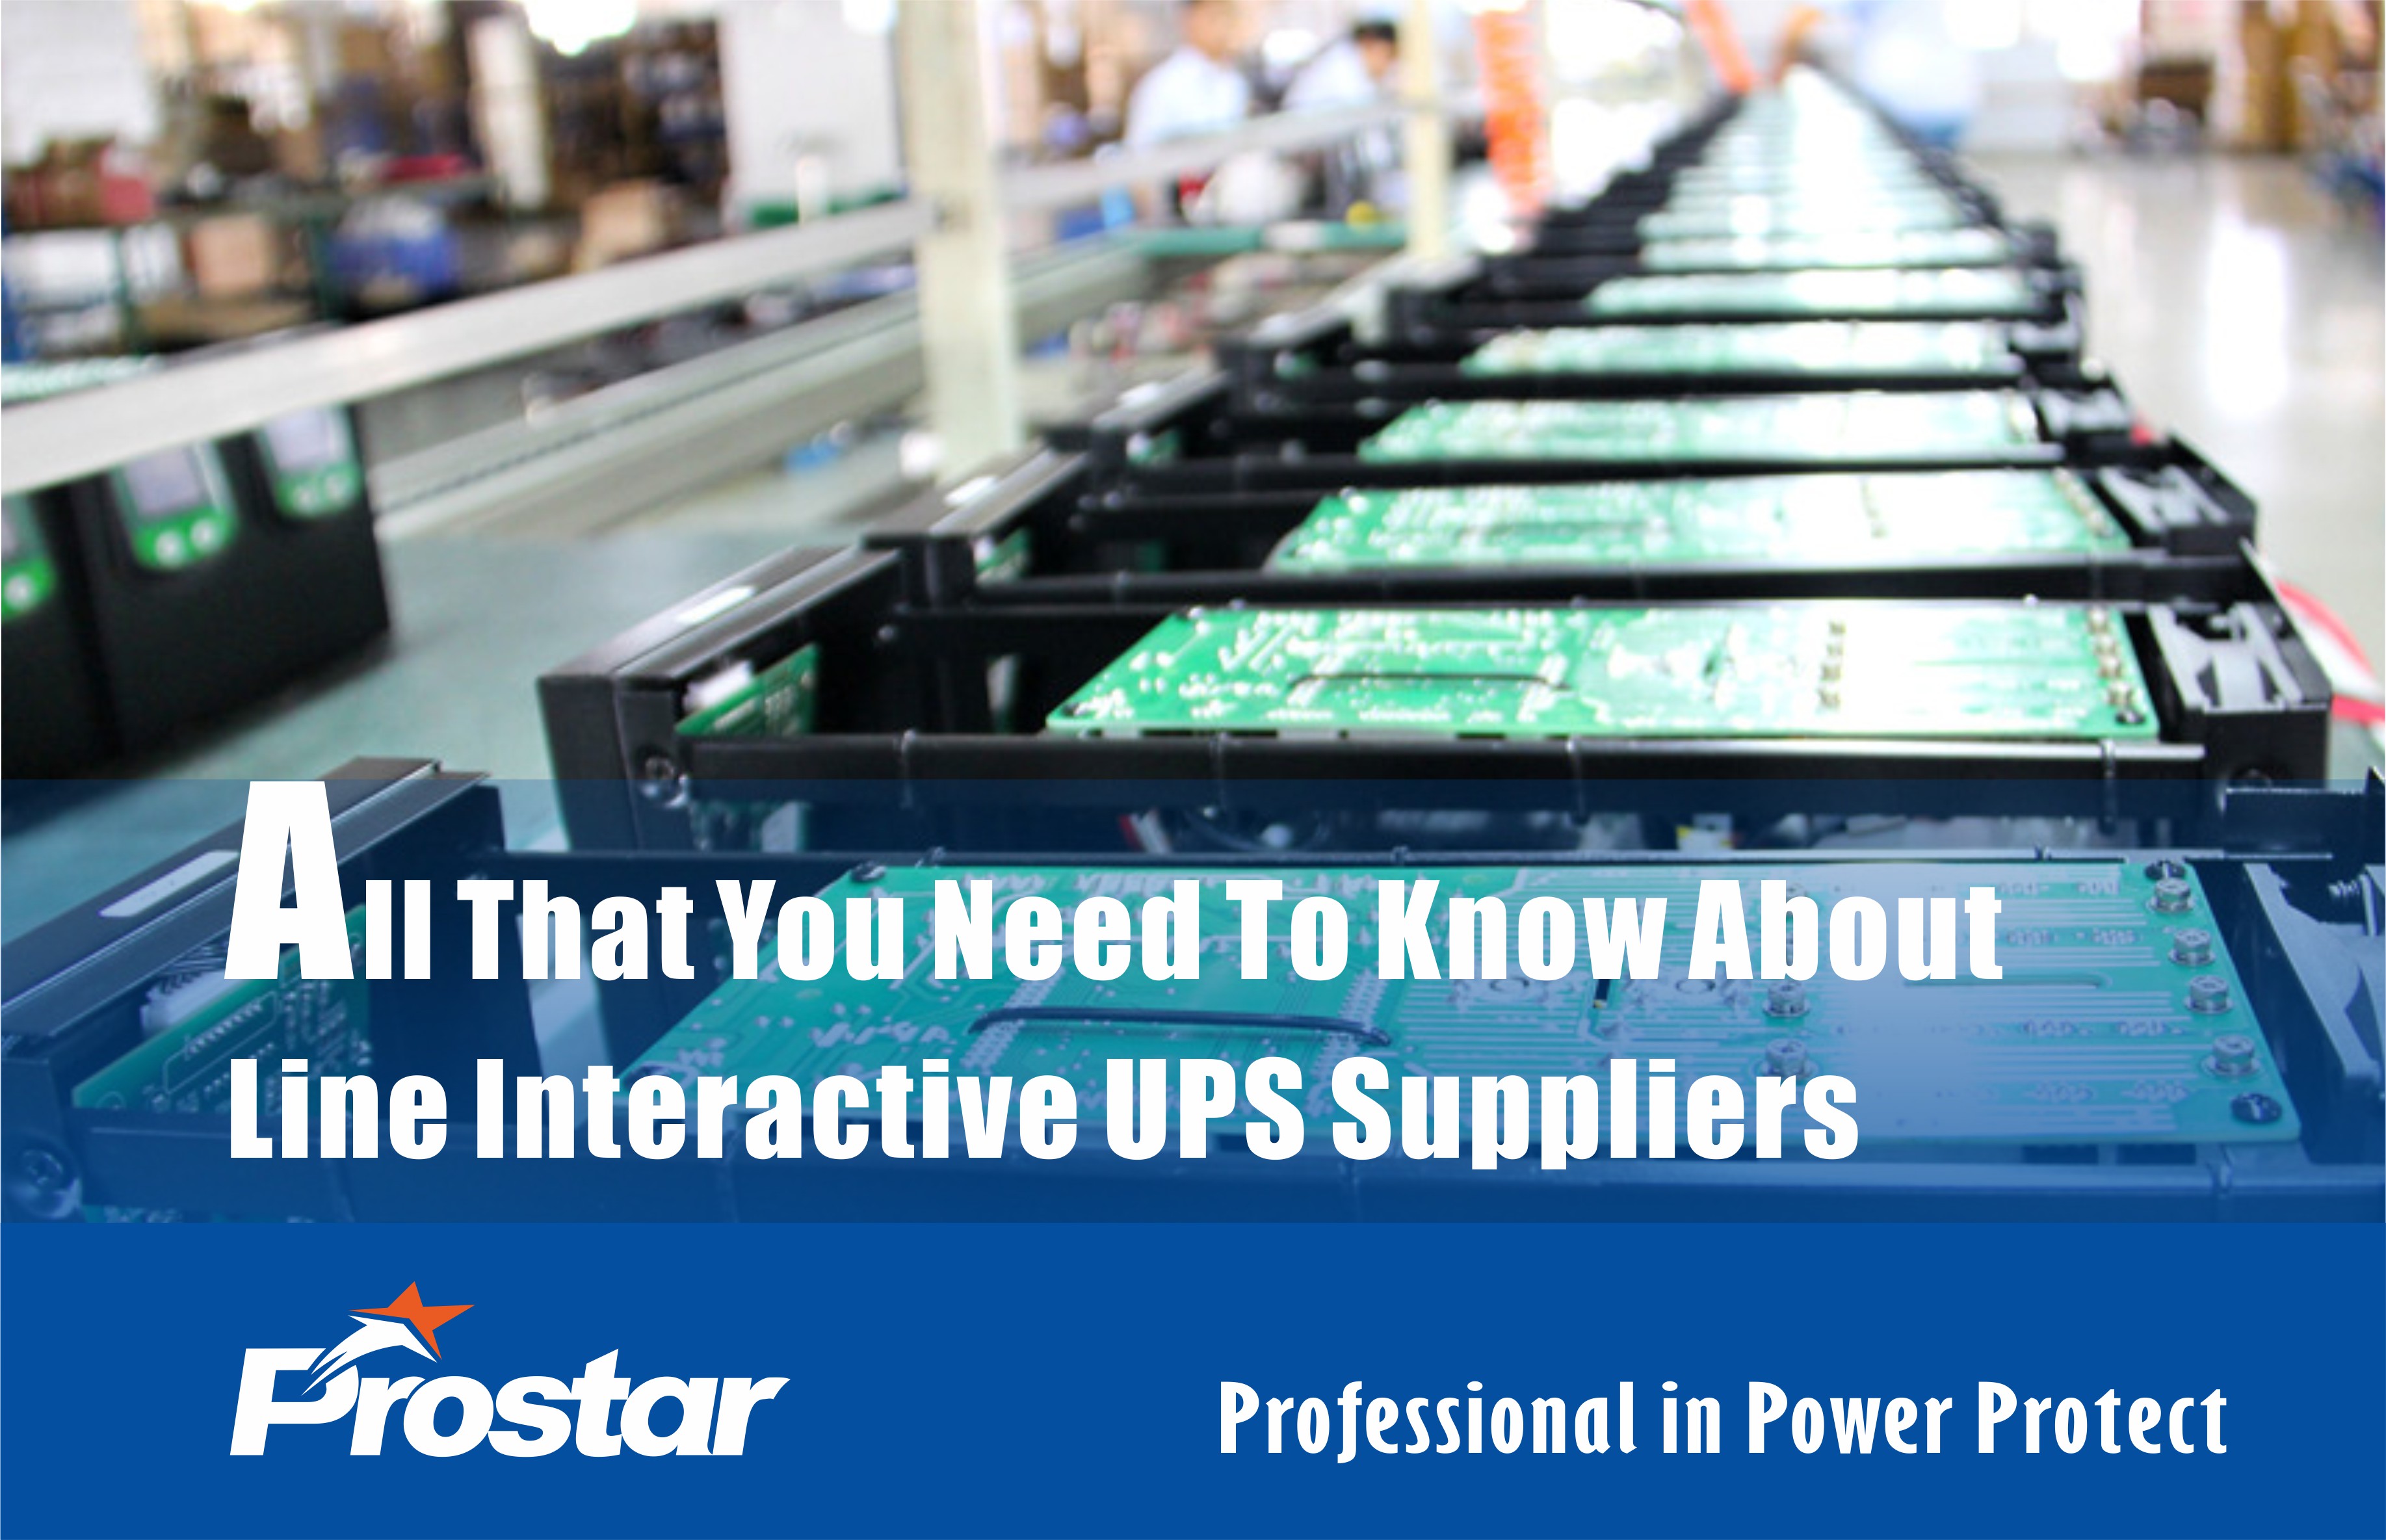 All That You Need To Know About Line Interactive UPS Suppliers